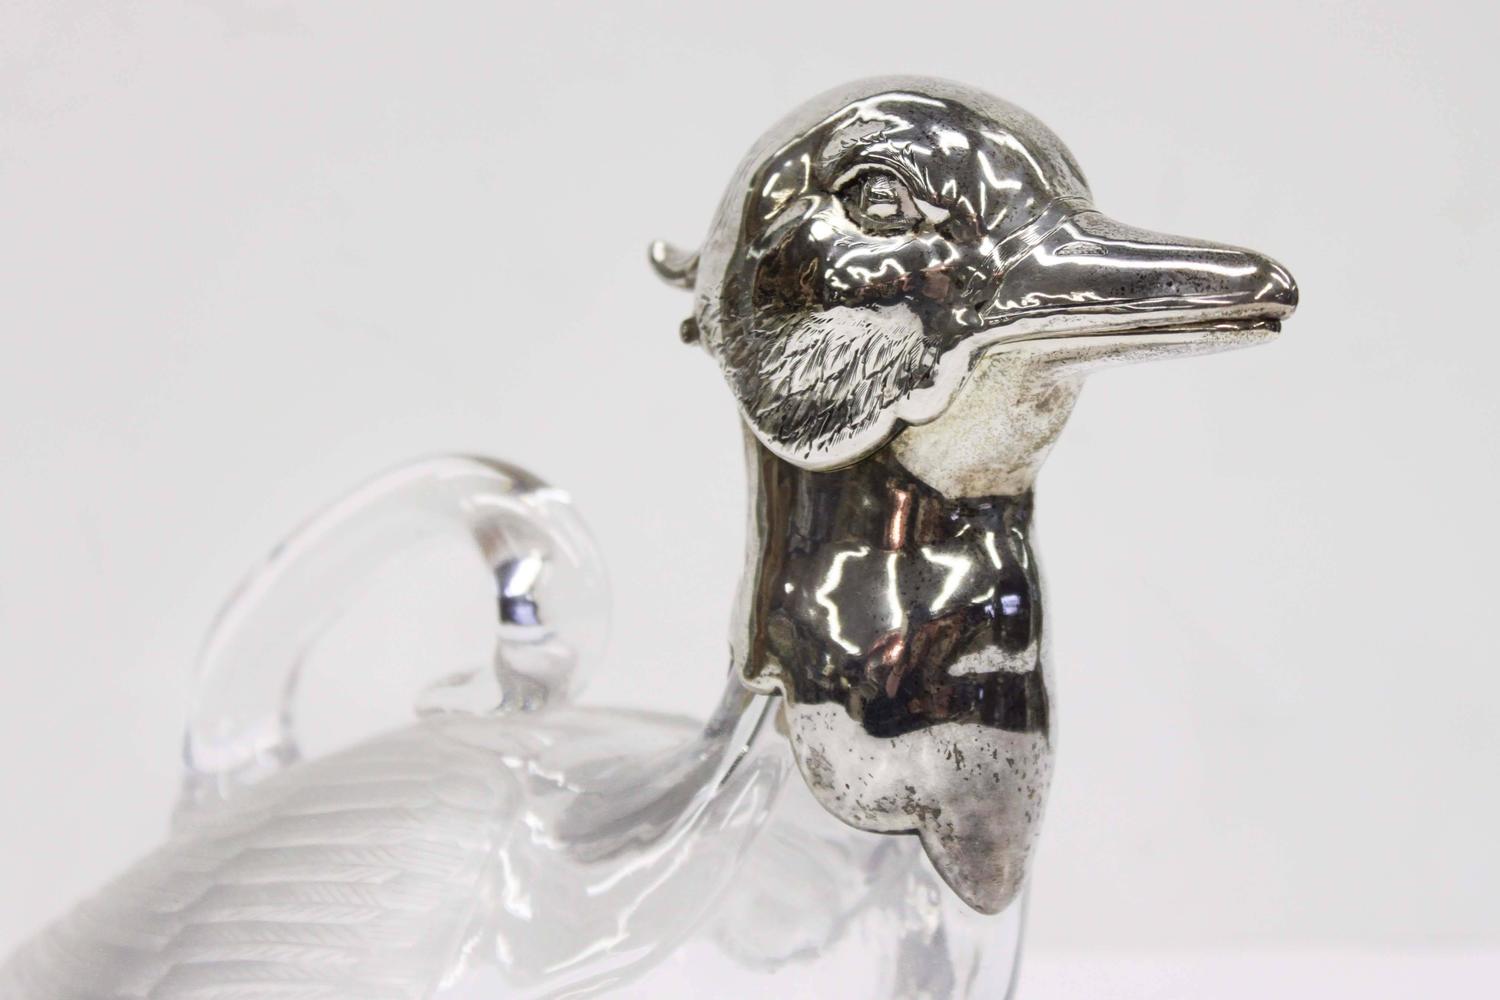 Crystal and Sterling Duck Claret Jug For Sale at 1stdibs